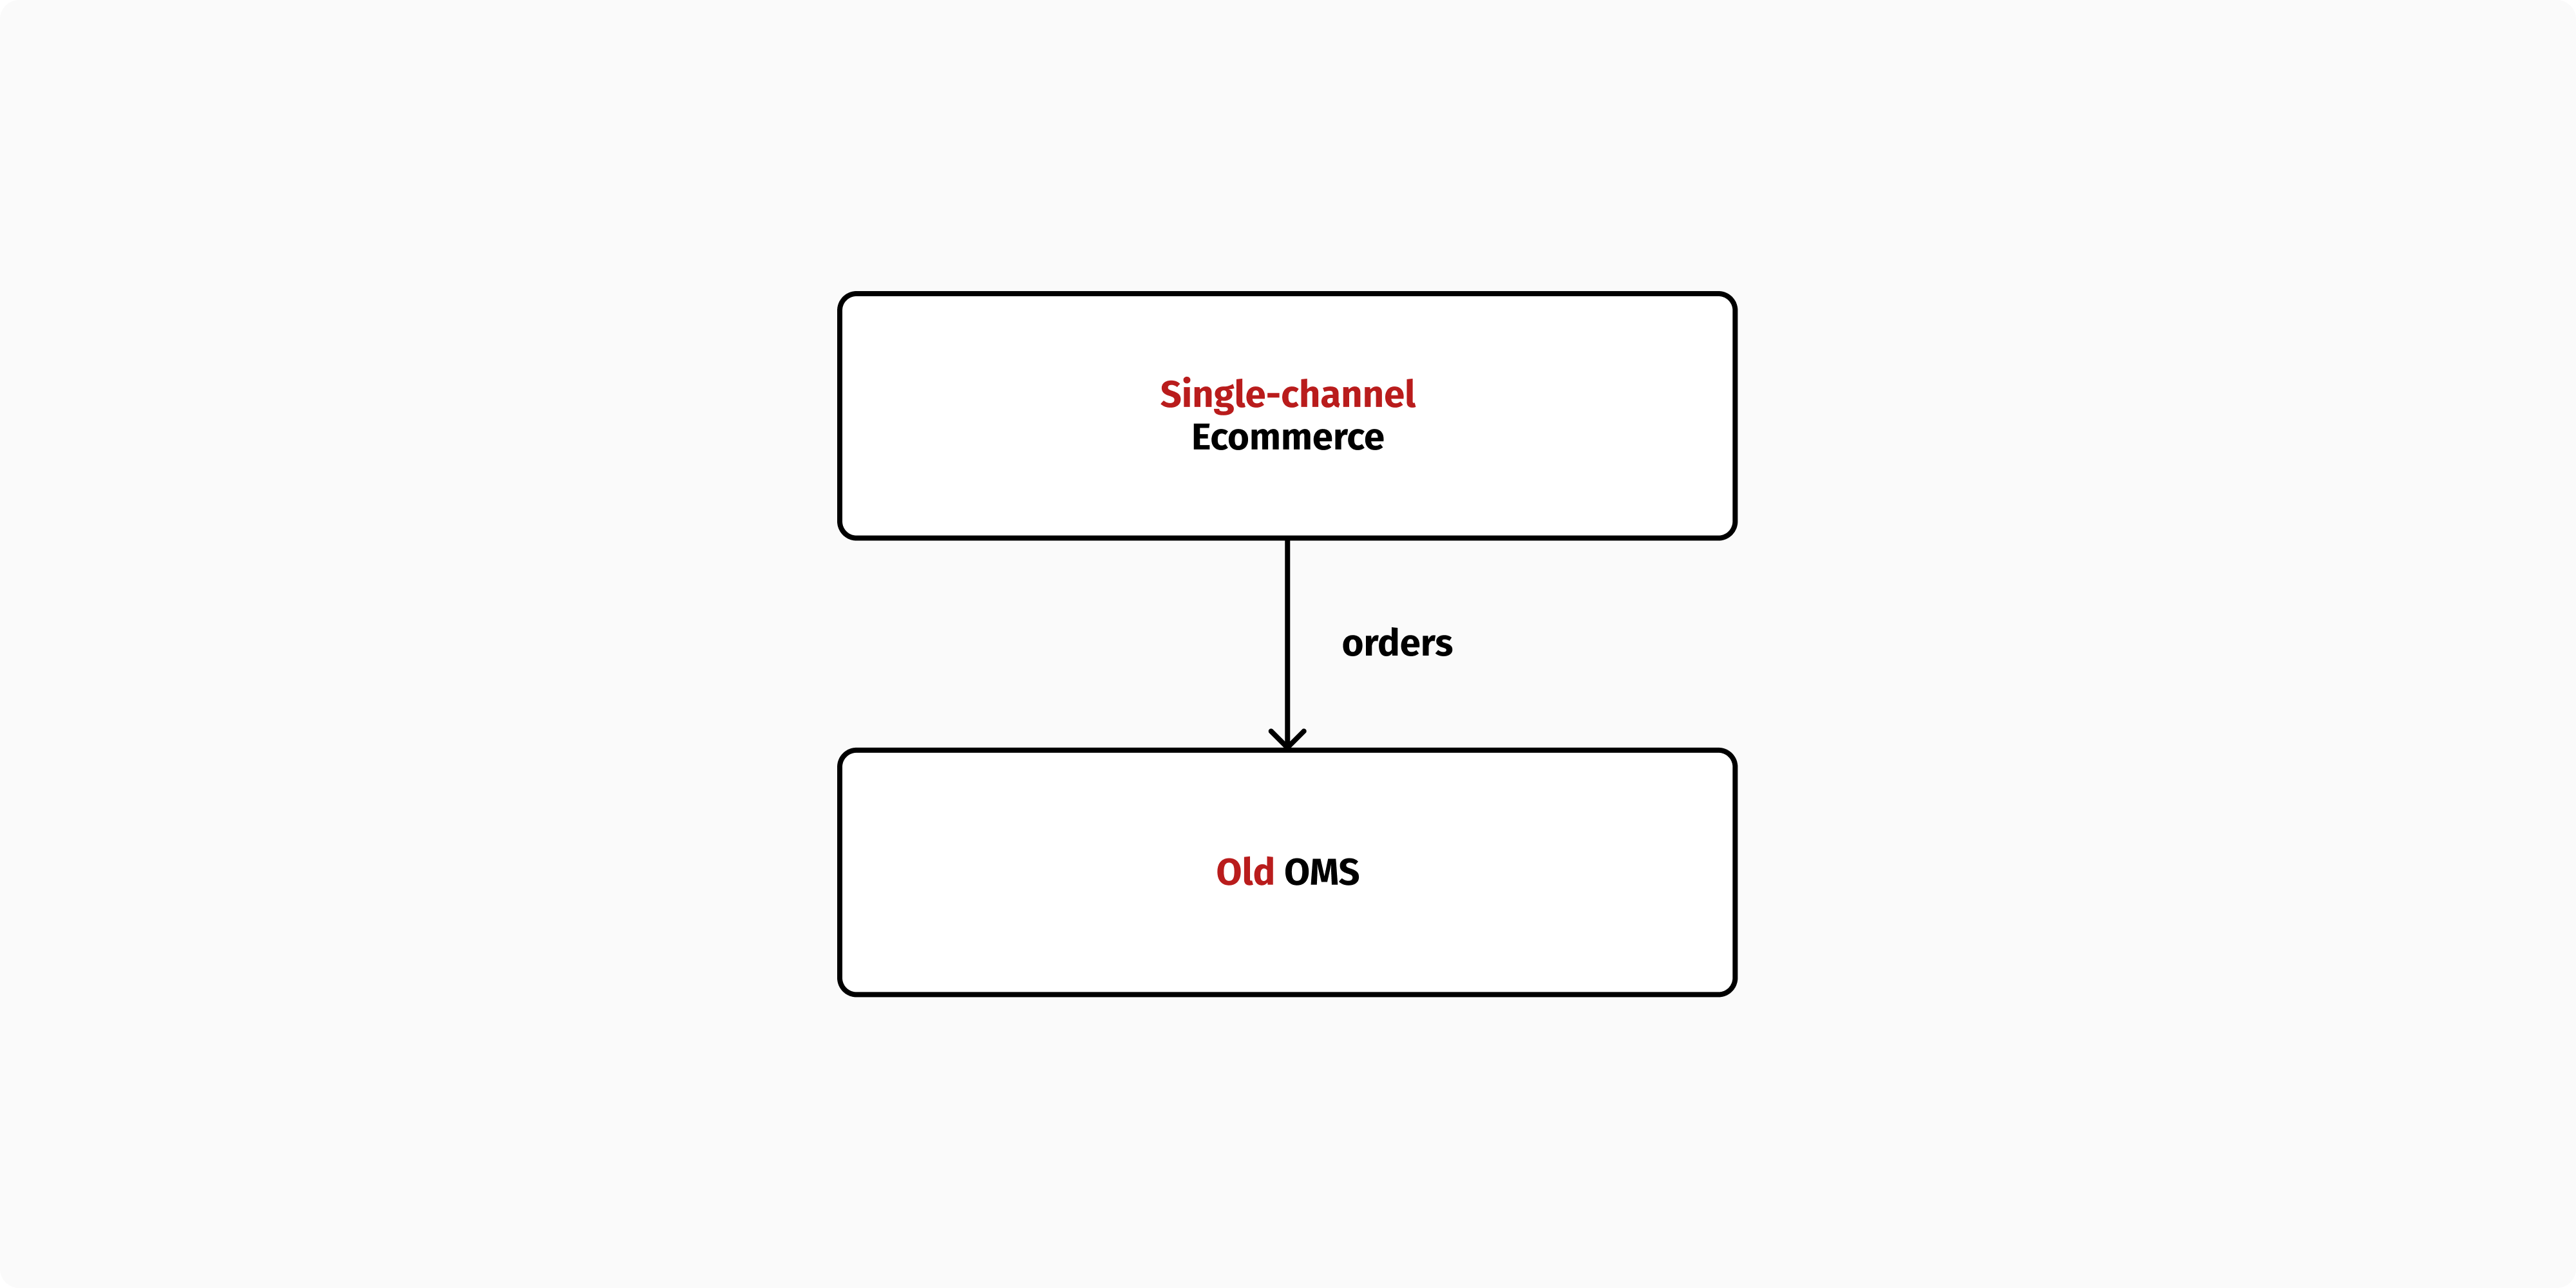 The role of OMS in a single-channel ecommerce stack.